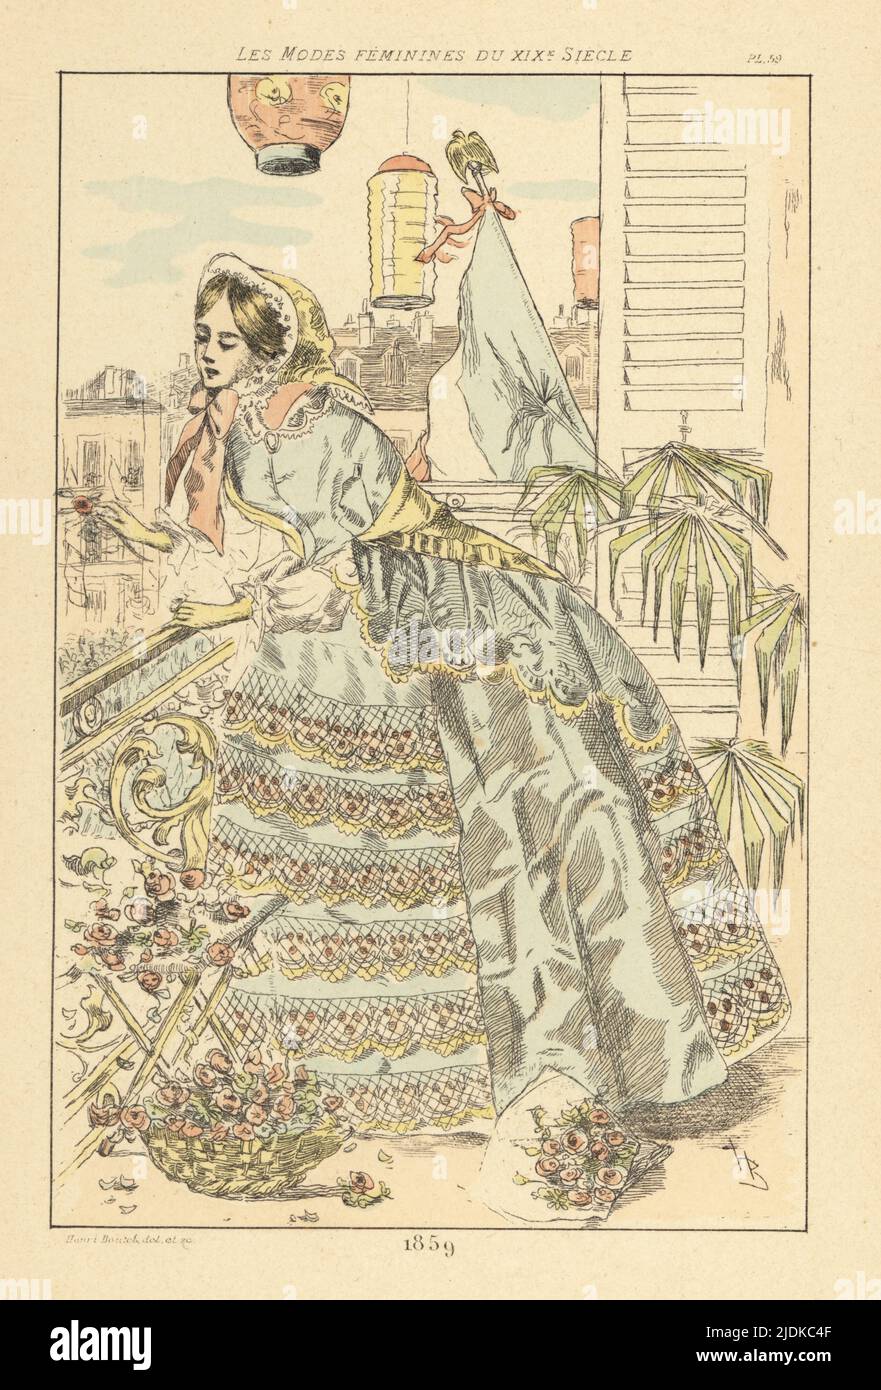 Fashionable lady on a Paris balcony watching a victory parade after the Franco-Austrian War, 1859. Wearing a long satin shawl over a richly embroidered gown. A tricolor flag and Chinese lanterns in the background. Handcoloured drypoint or pointe-seche etching by Henri Boutet from Les Modes Feminines du XIXeme Siecle (Feminine Fashions of the 19th Century), Ernest Flammarion, Paris, 1902. Boutet (1851-1919) was a French artist, engraver, lithographer and designer. Stock Photo